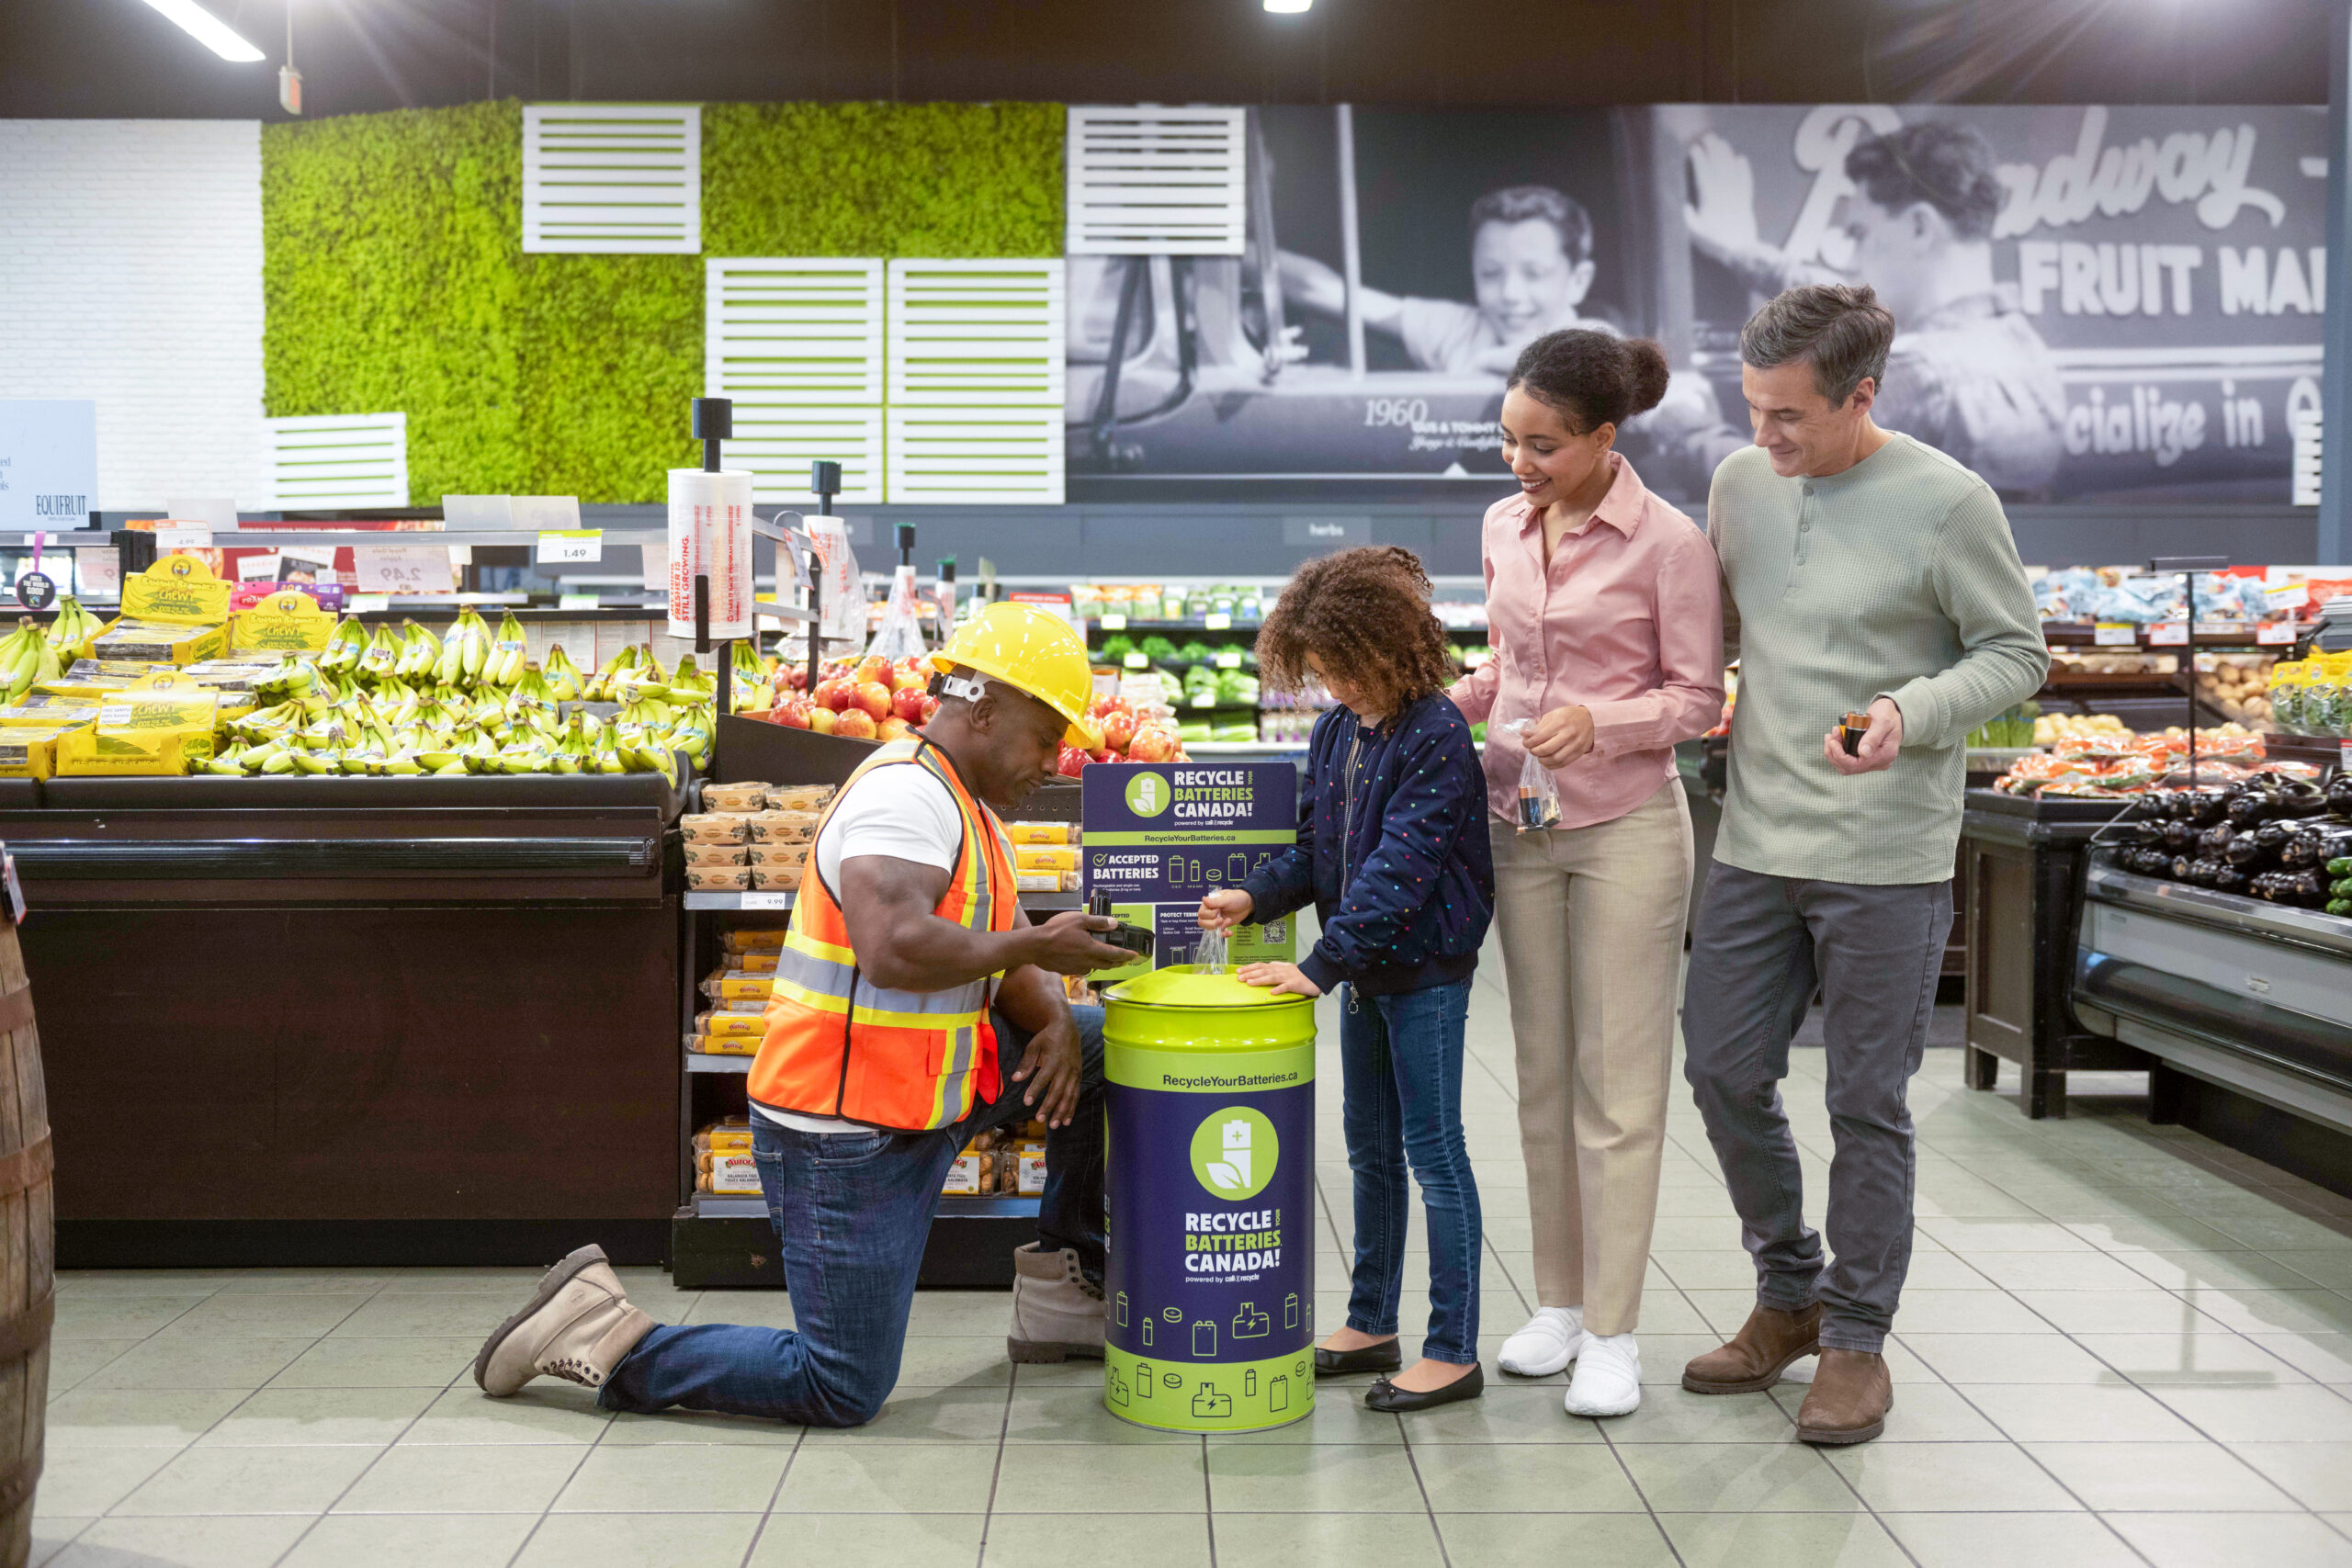 Group of people recycling batteries at grocery store scaled